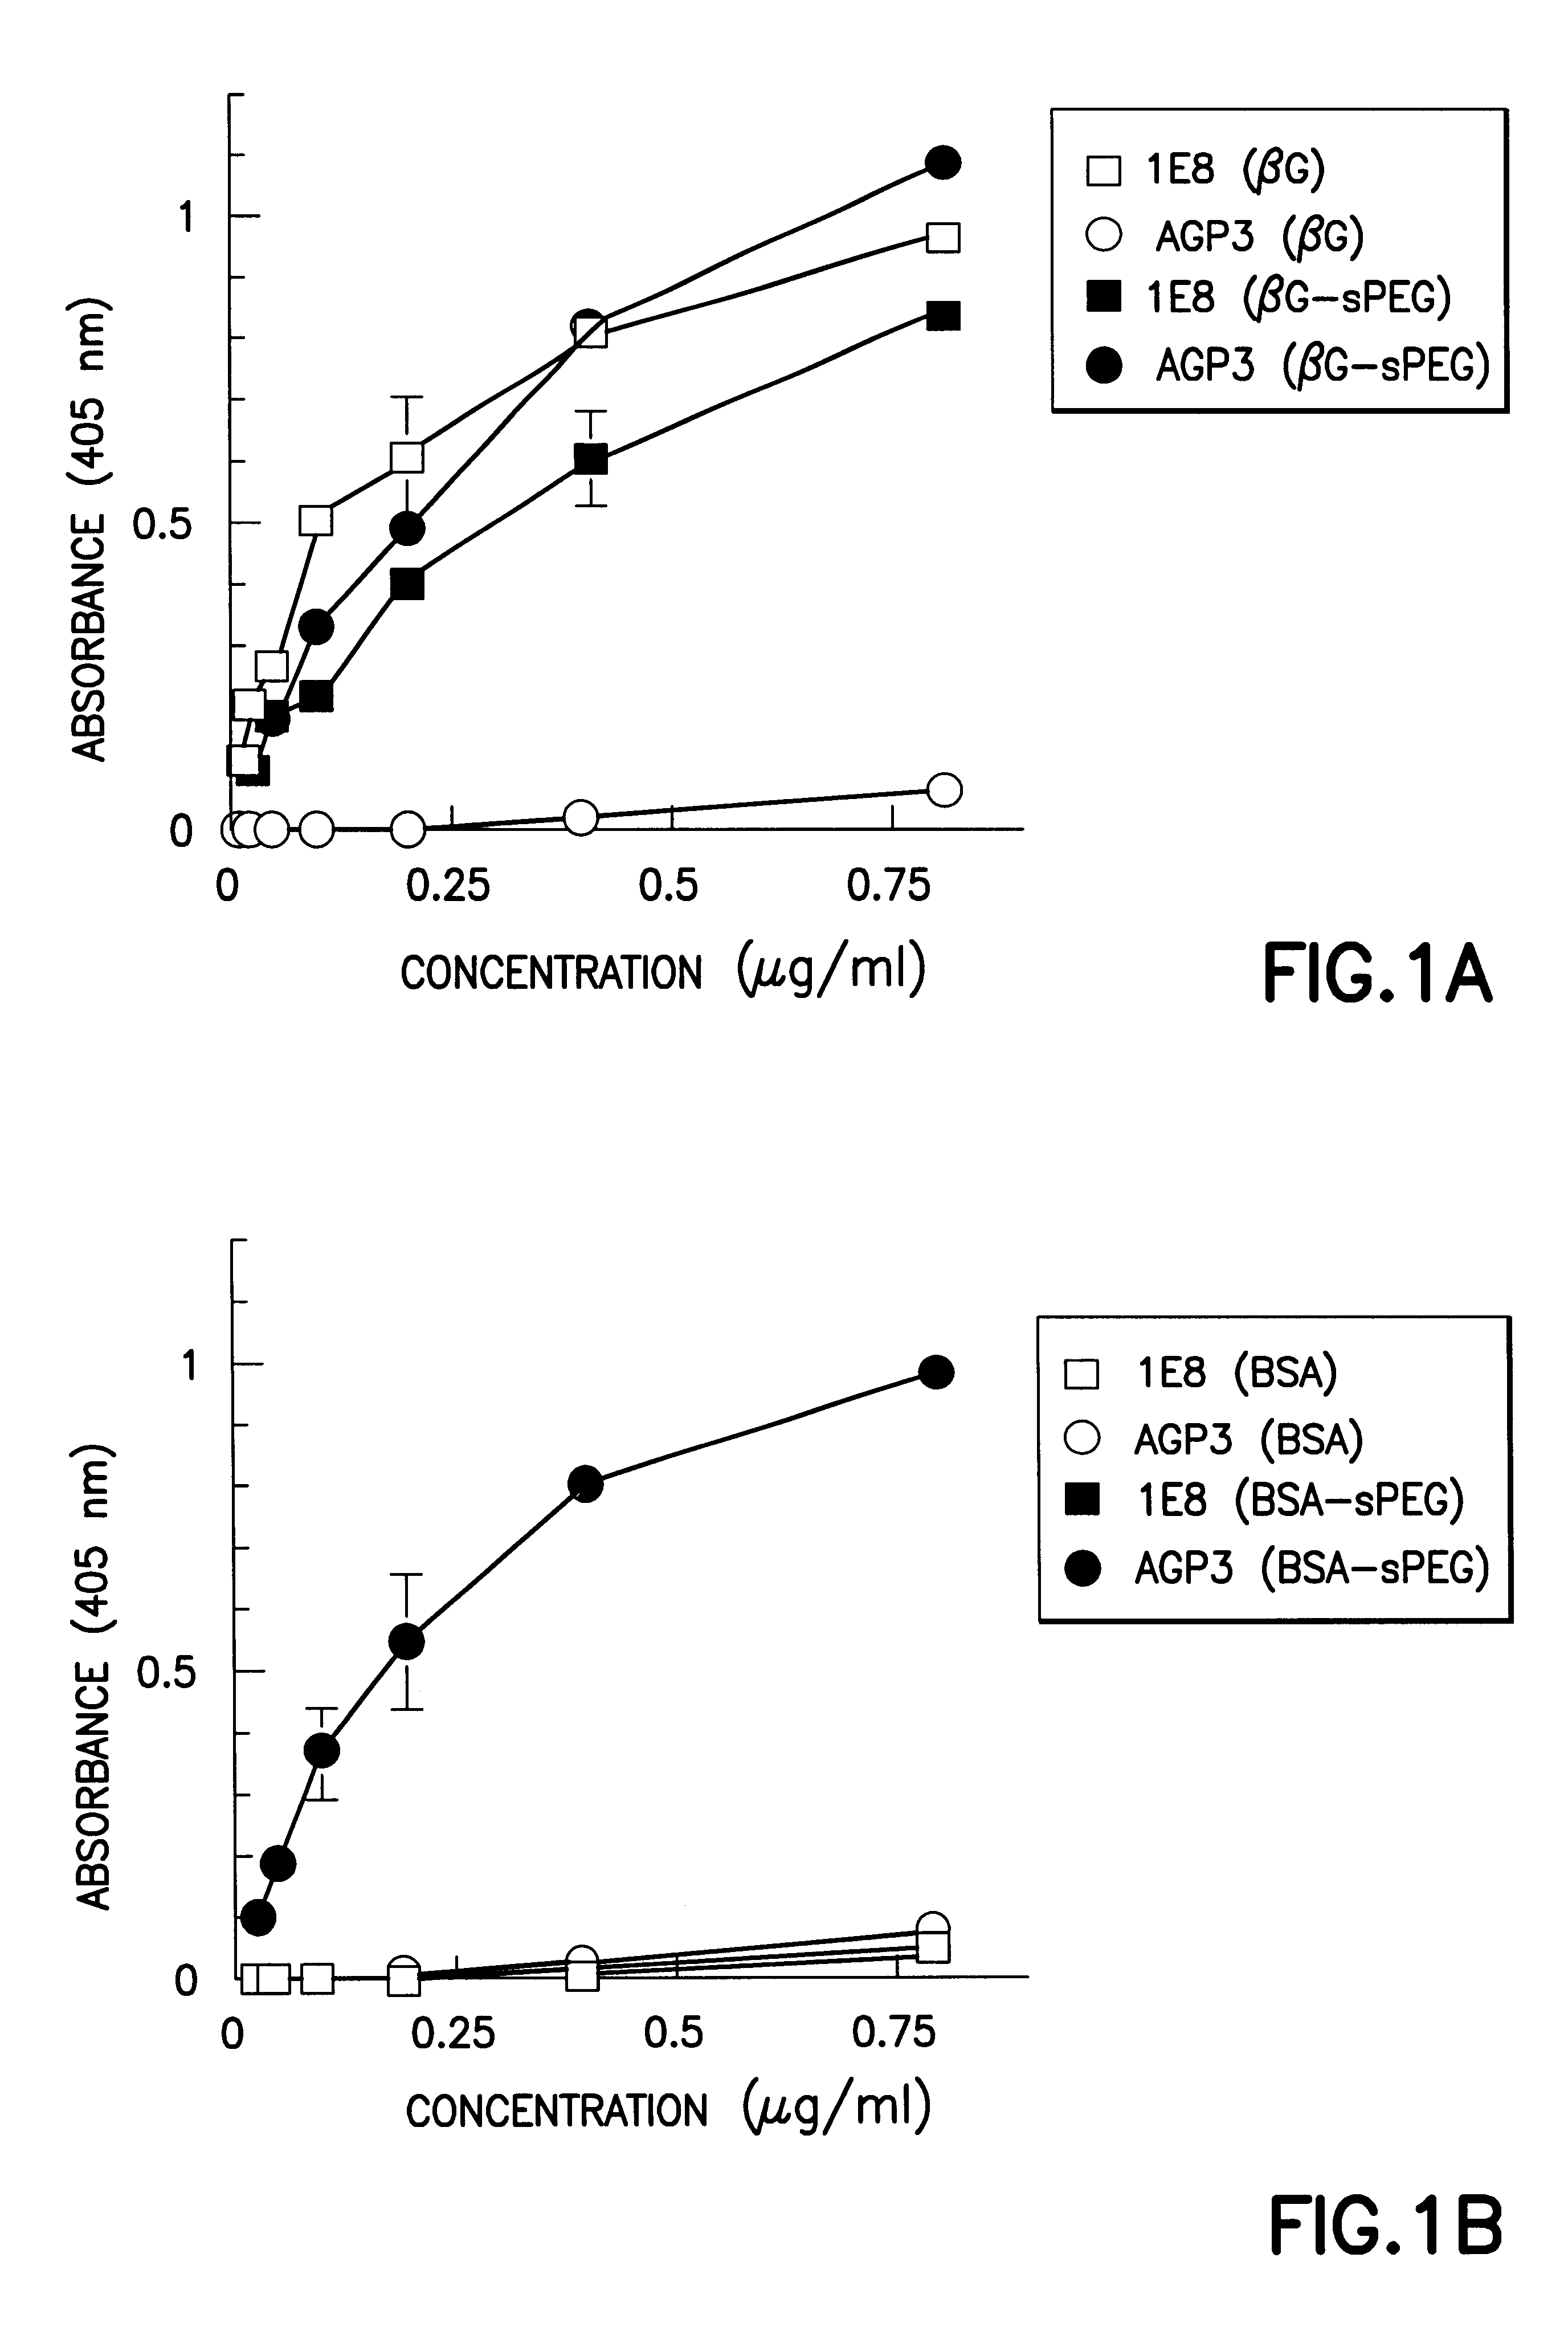 Monoclonal-antibody for analysis and clearance of polyethylene glycol and polyethylene glycol-modified molecules